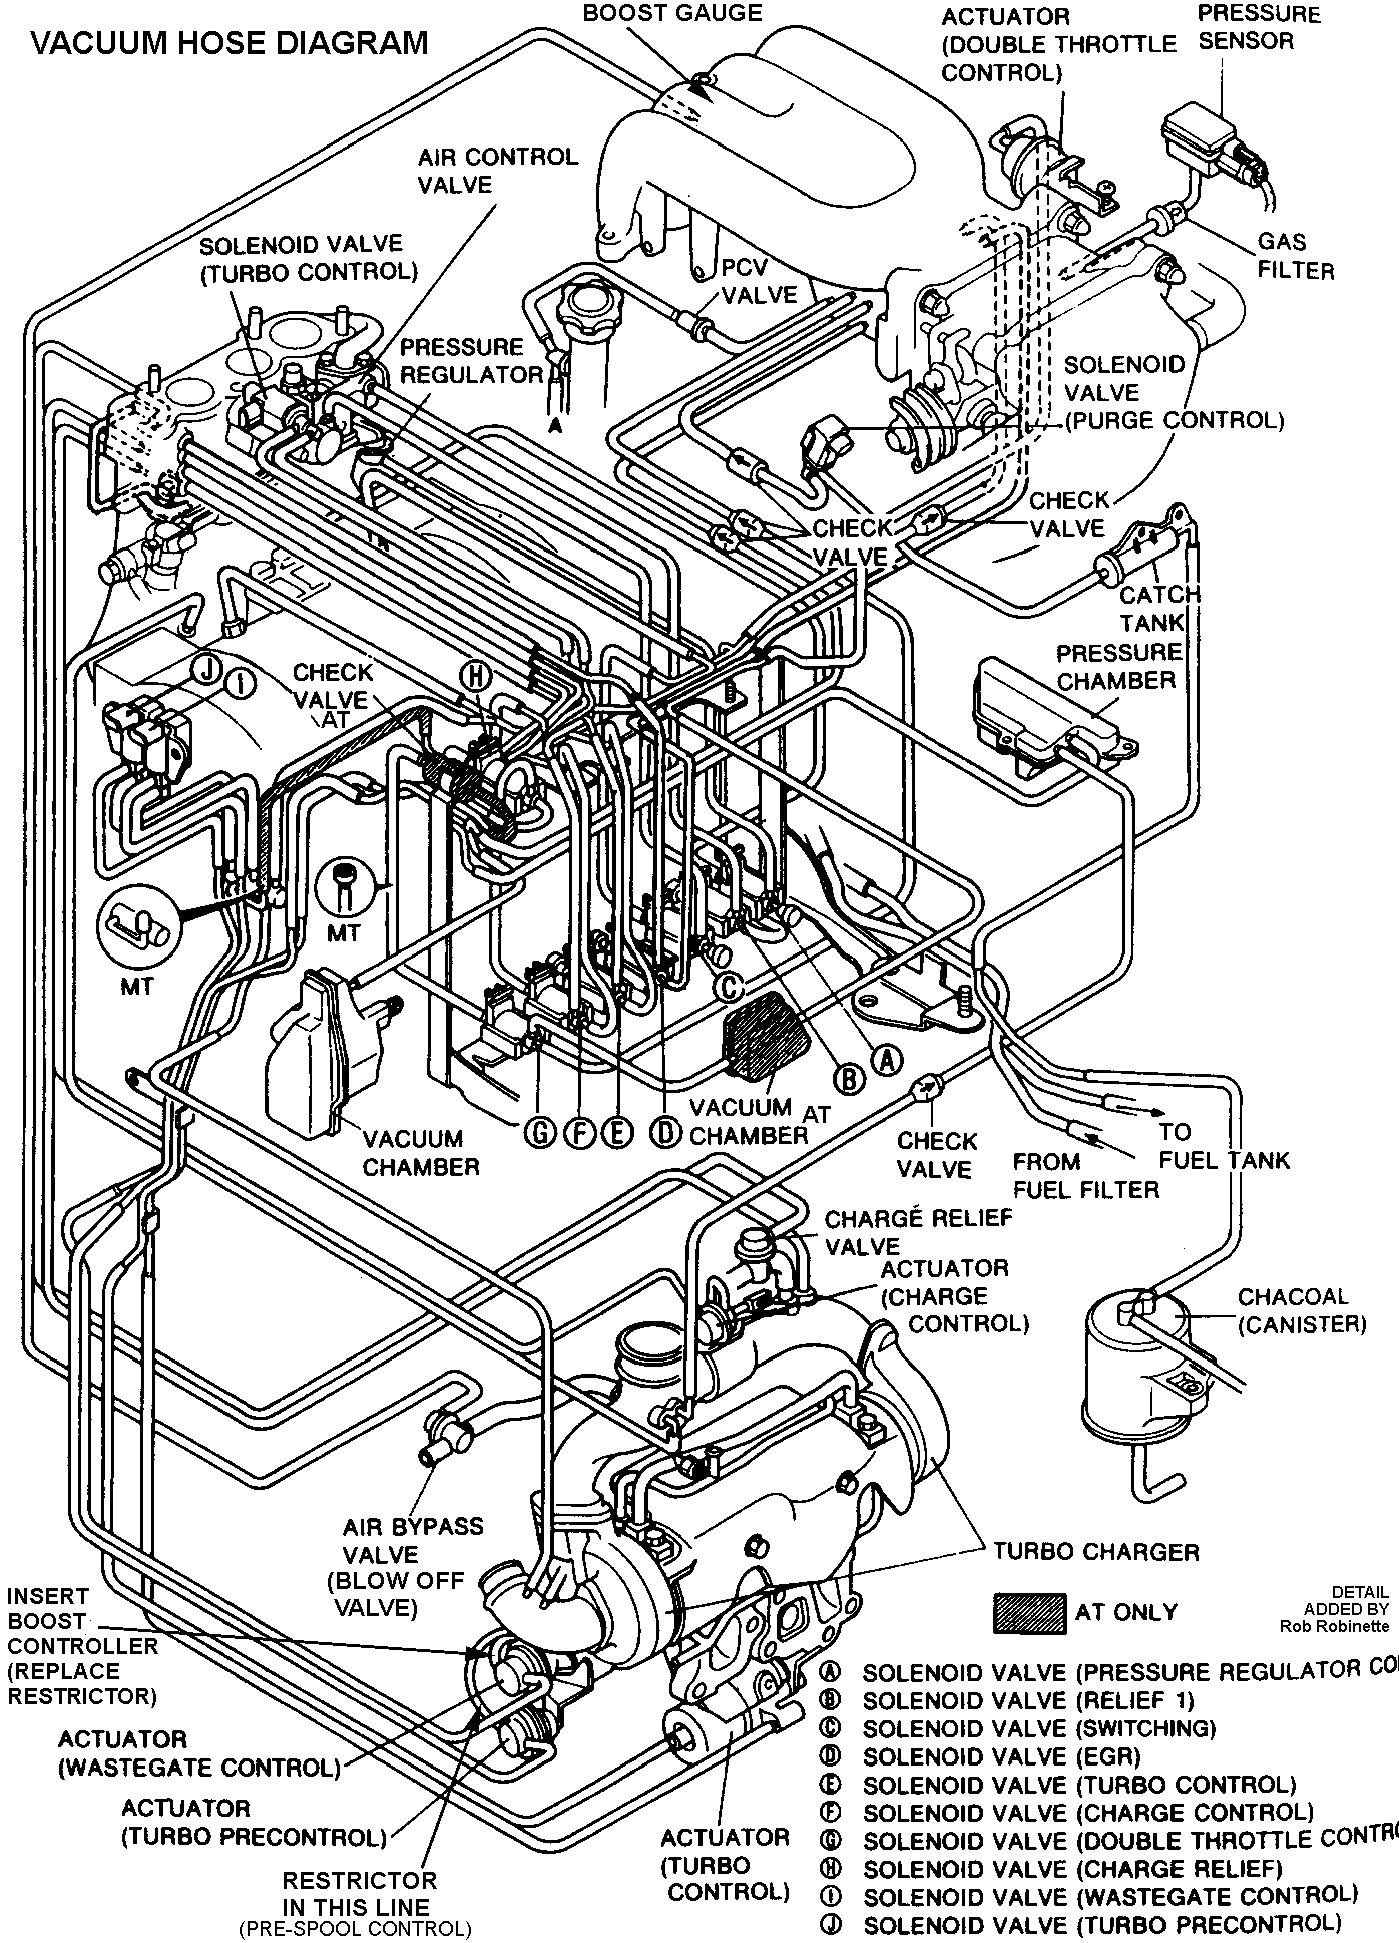 Car Engine Parts and Functions Diagram 94 Miata 1 8 Engine Diagram Another Blog About Wiring Diagram • Of Car Engine Parts and Functions Diagram